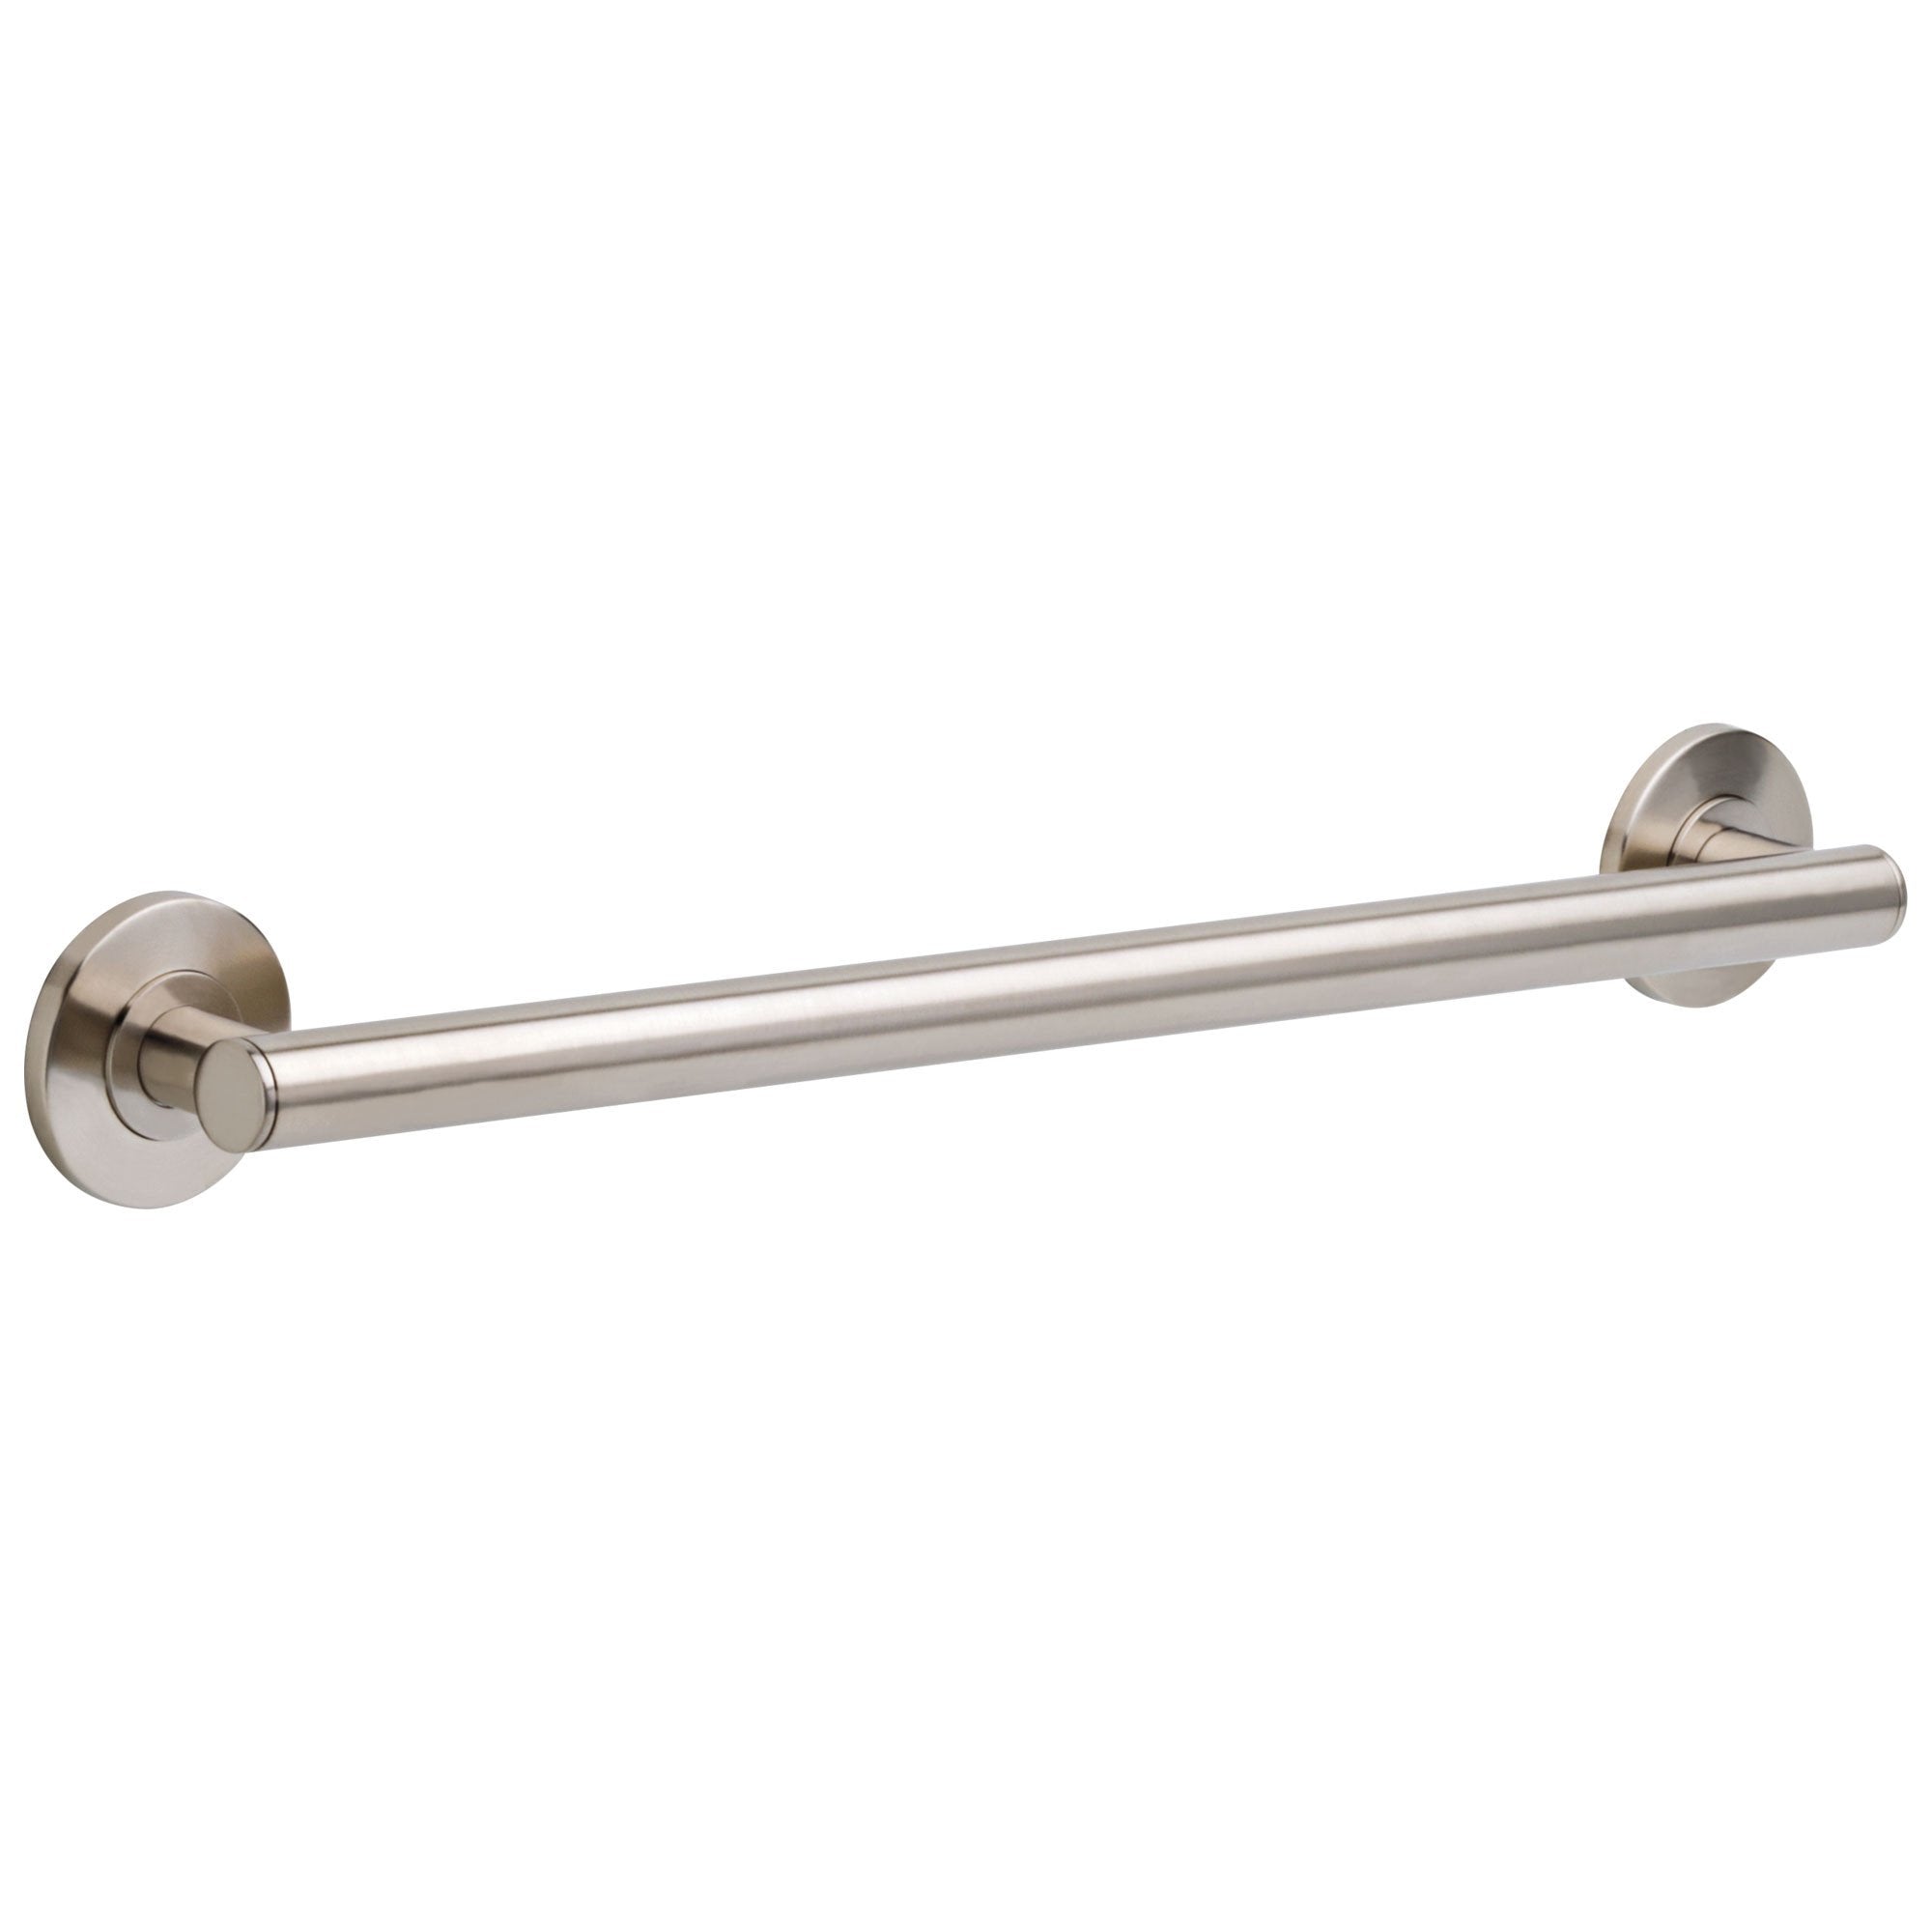 Delta Bath Safety Collection Stainless Steel Finish Contemporary Wall Mounted 24" Decorative Bathroom ADA Grab Bar D41824SS